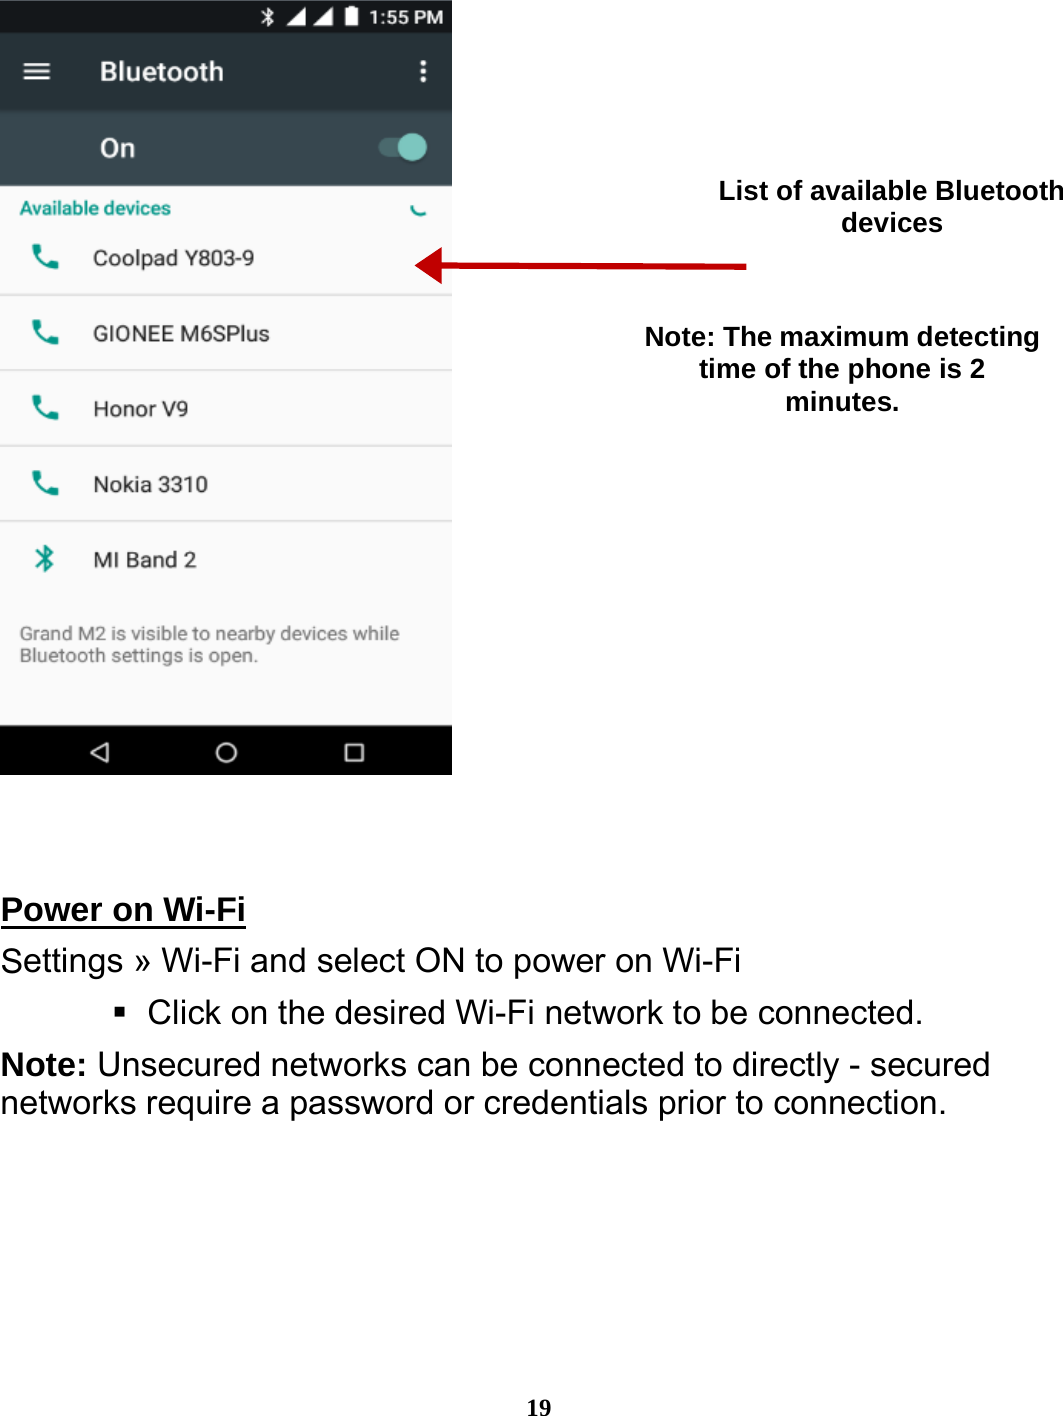  19     Power on Wi-Fi                                                      Settings » Wi-Fi and select ON to power on Wi-Fi    Click on the desired Wi-Fi network to be connected.                 Note: Unsecured networks can be connected to directly - secured networks require a password or credentials prior to connection. List of available Bluetooth devices Note: The maximum detecting time of the phone is 2 minutes. 